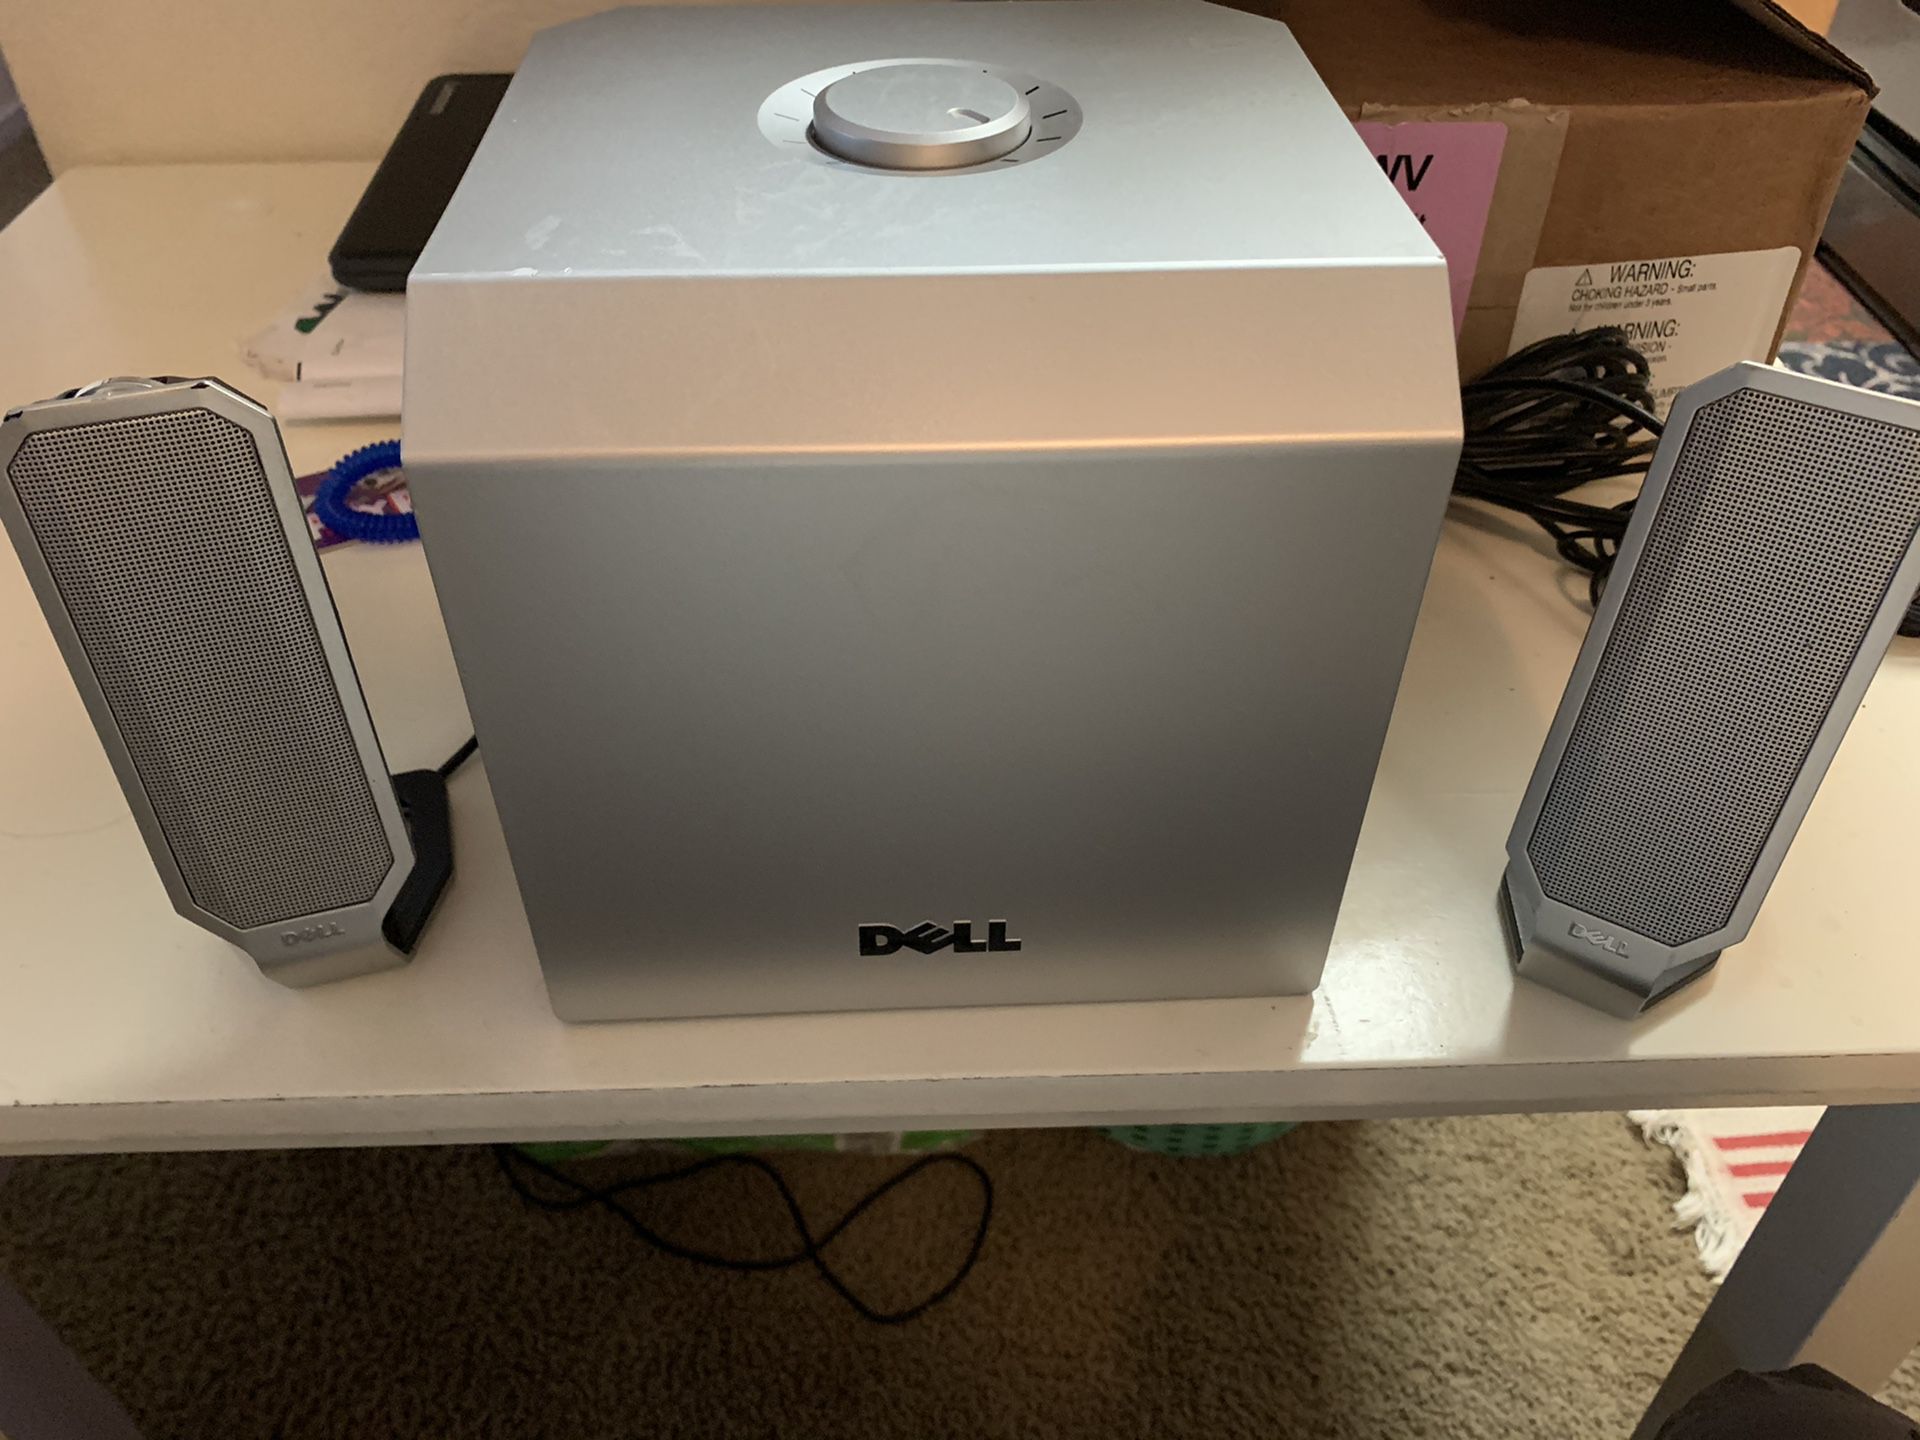 Dell 2.1 computer speakers